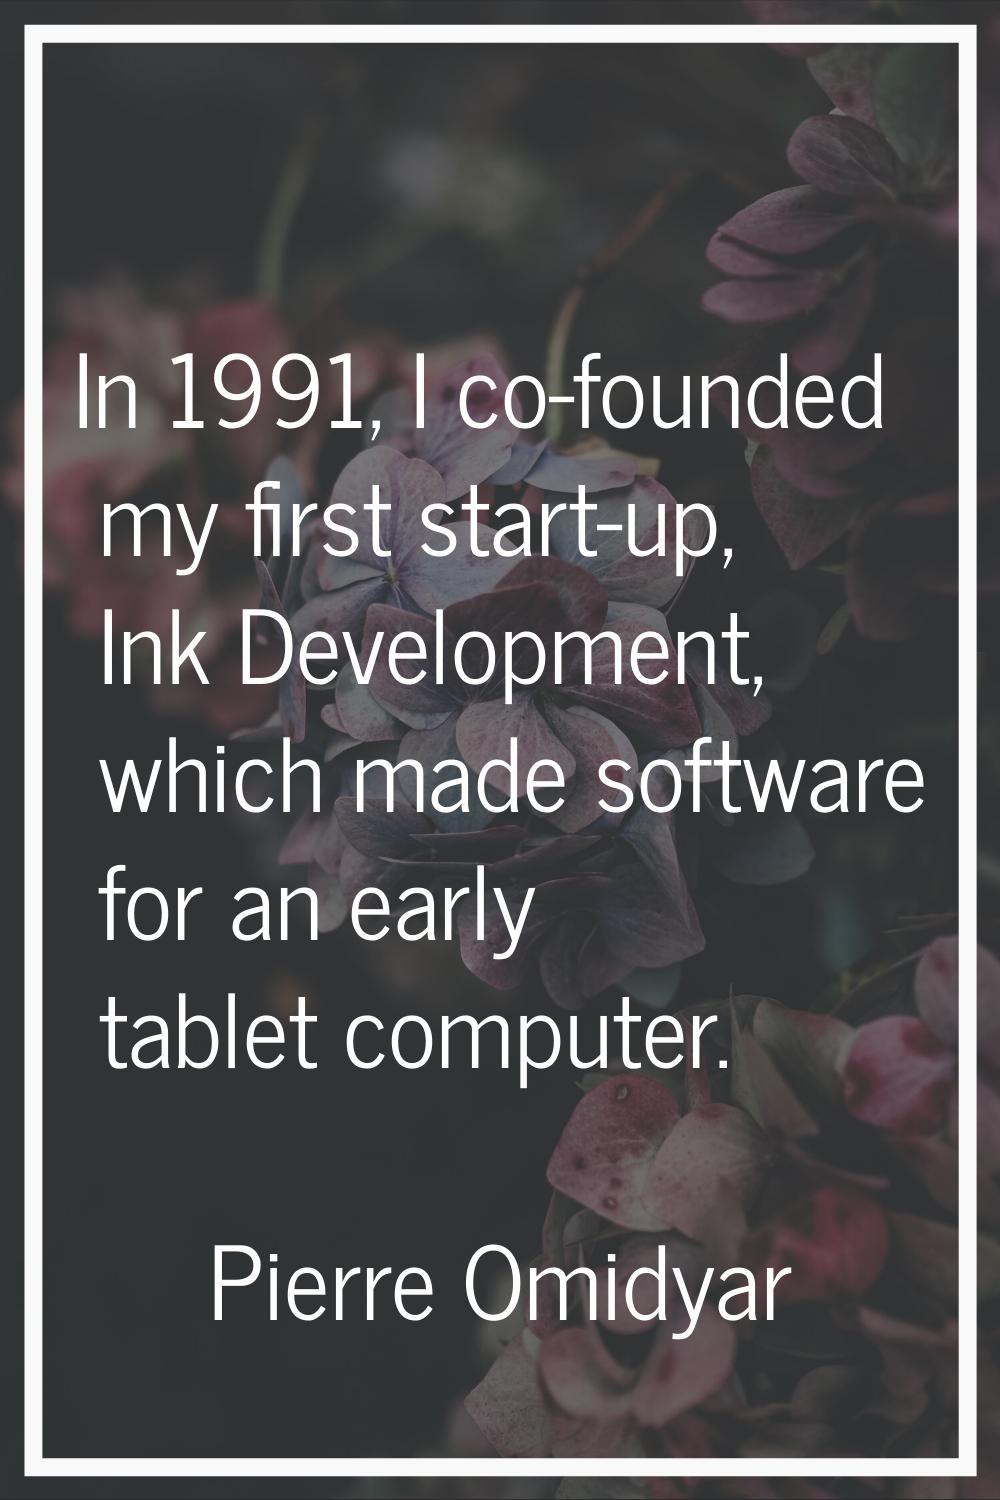 In 1991, I co-founded my first start-up, Ink Development, which made software for an early tablet c